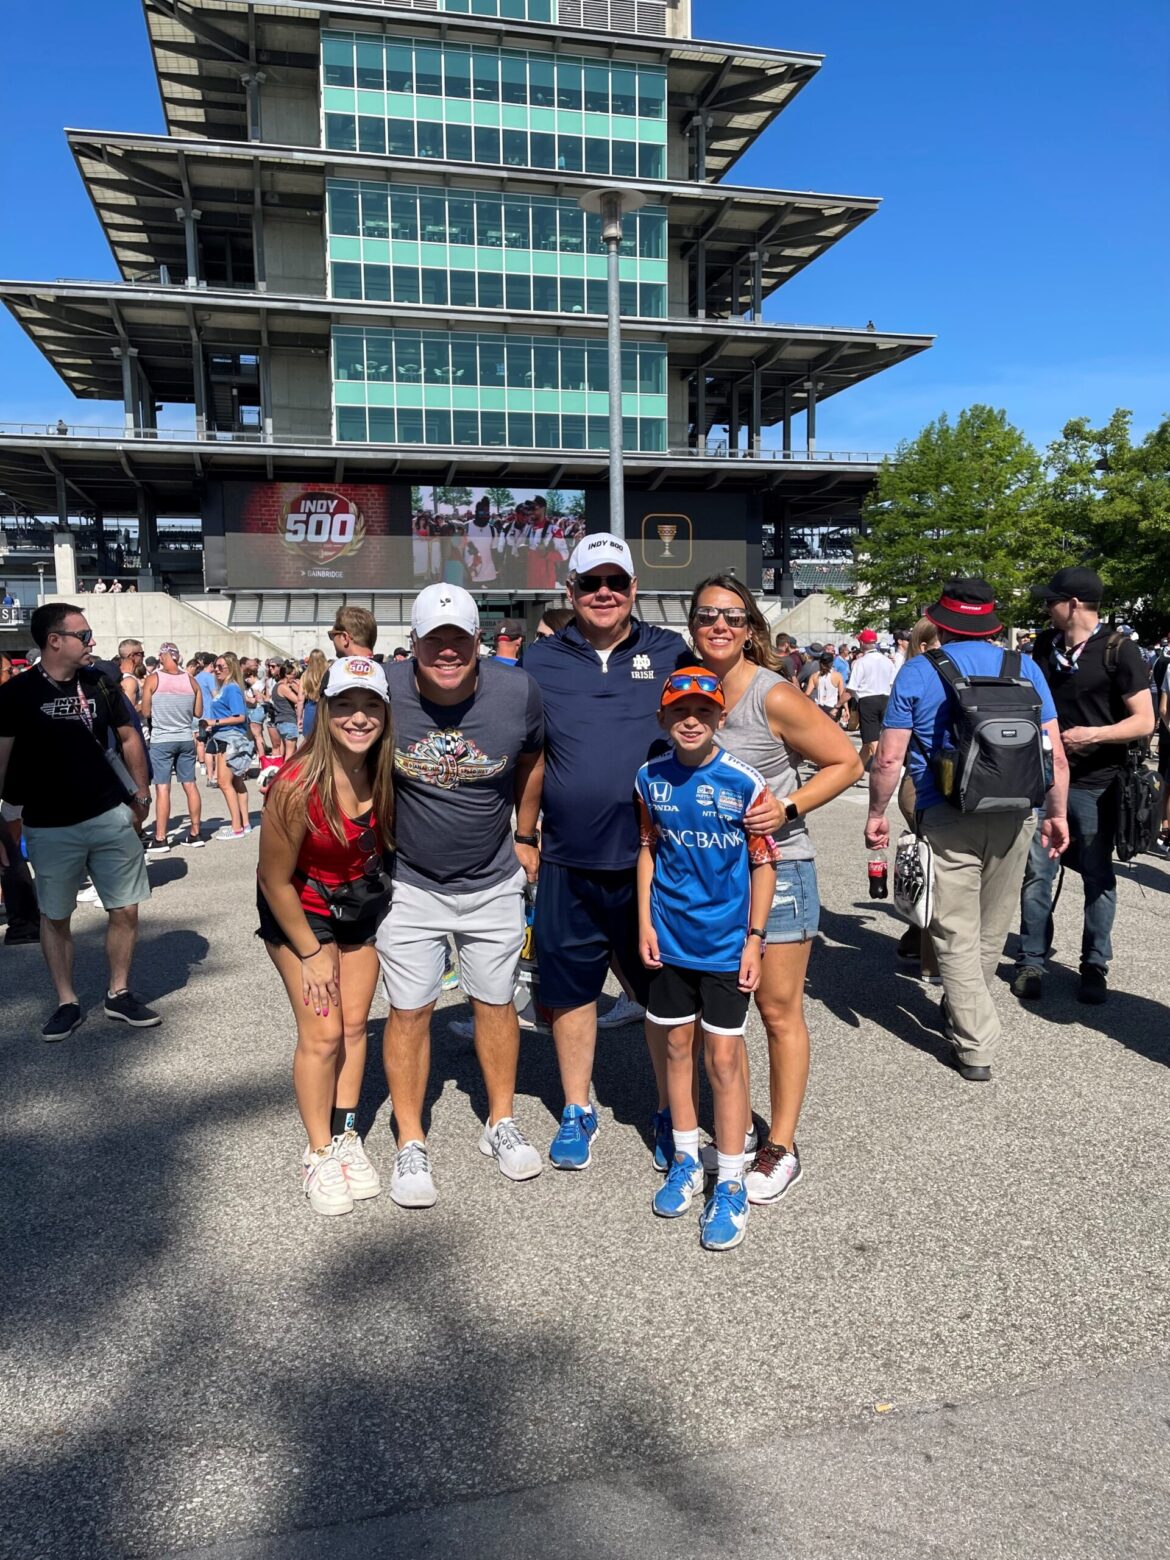 A family Race Day tradition